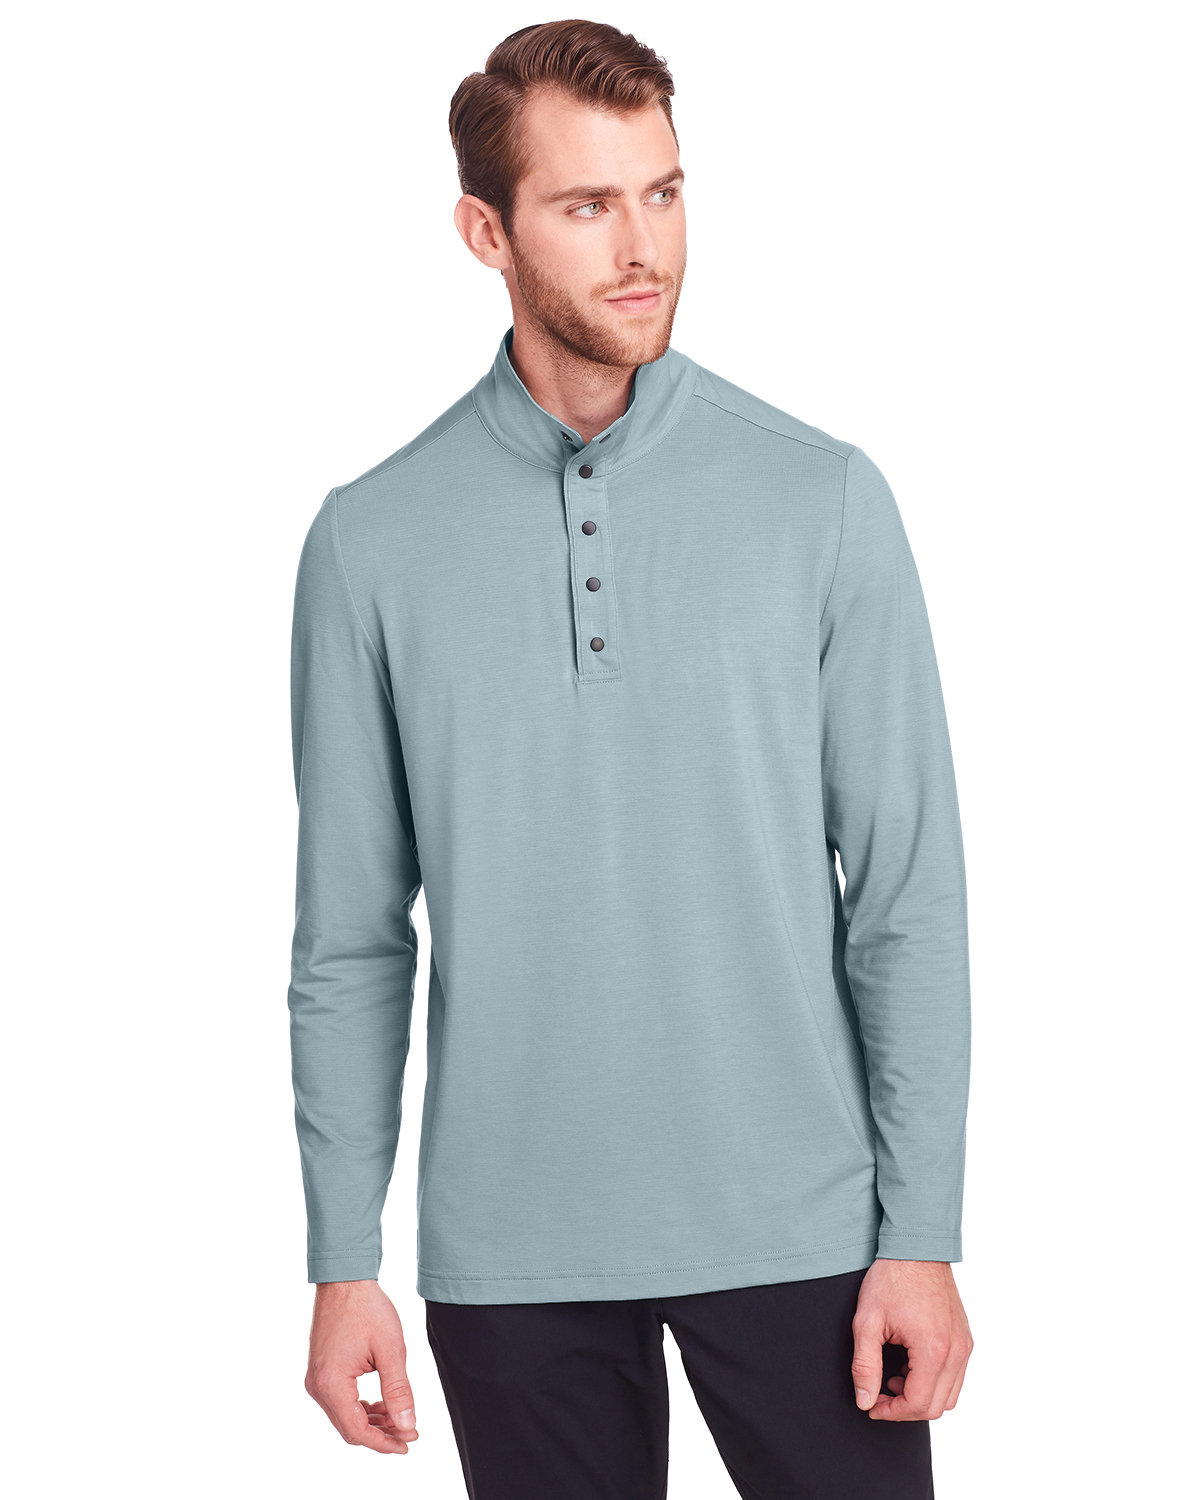 North End Men's Jaq Snap-Up Stretch Performance Pullover OPAL BLUE 